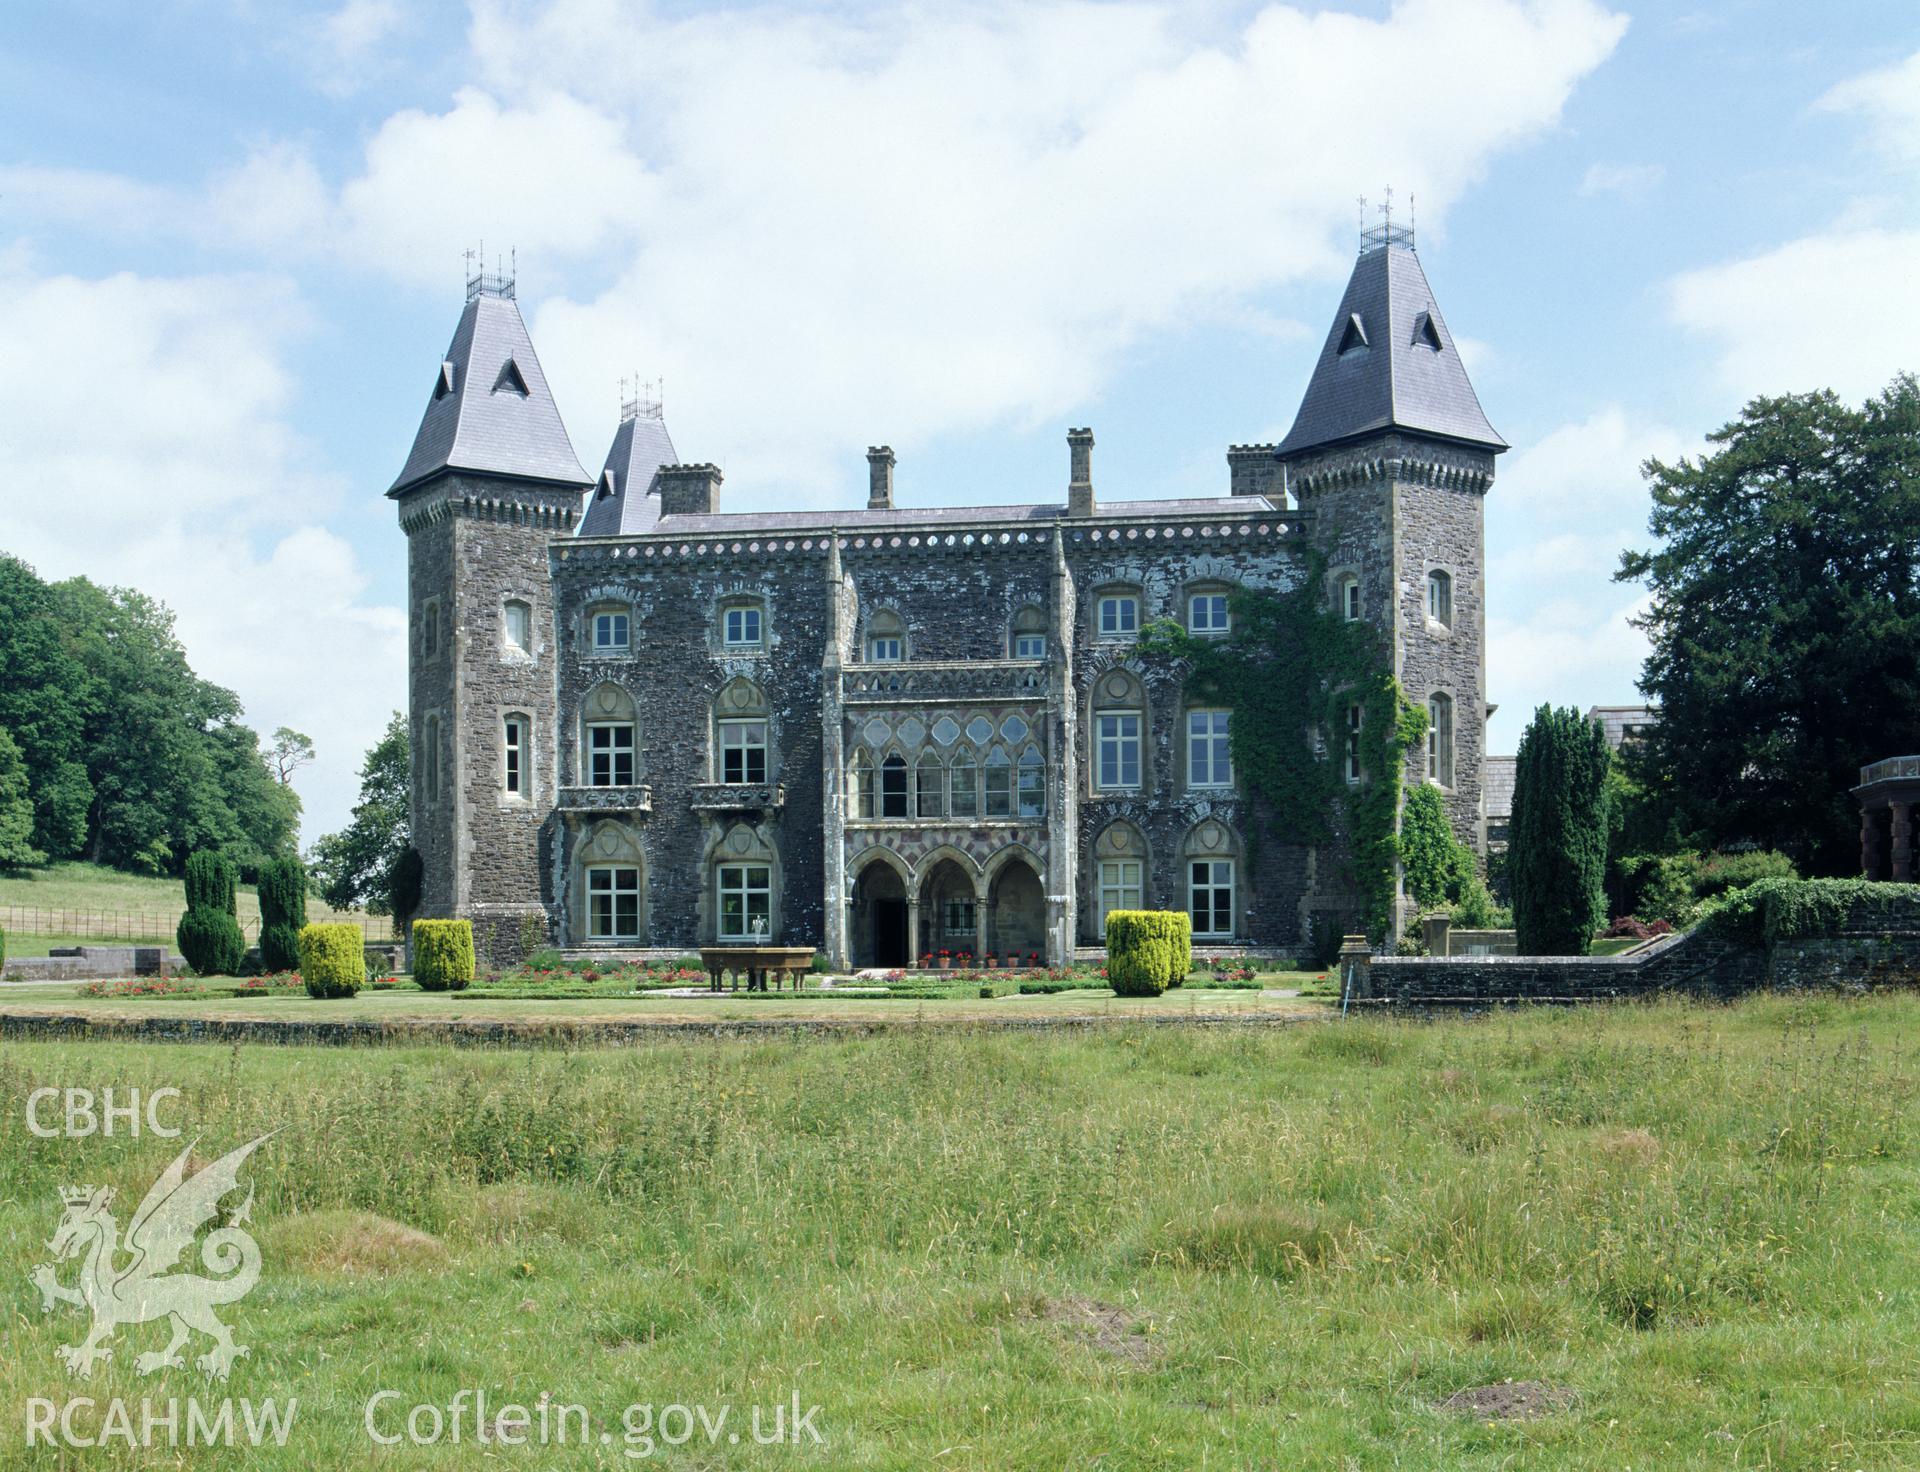 Colour transparency showing an exterior view of Newton House, Dinefwr, produced by Iain Wright, June 2004.